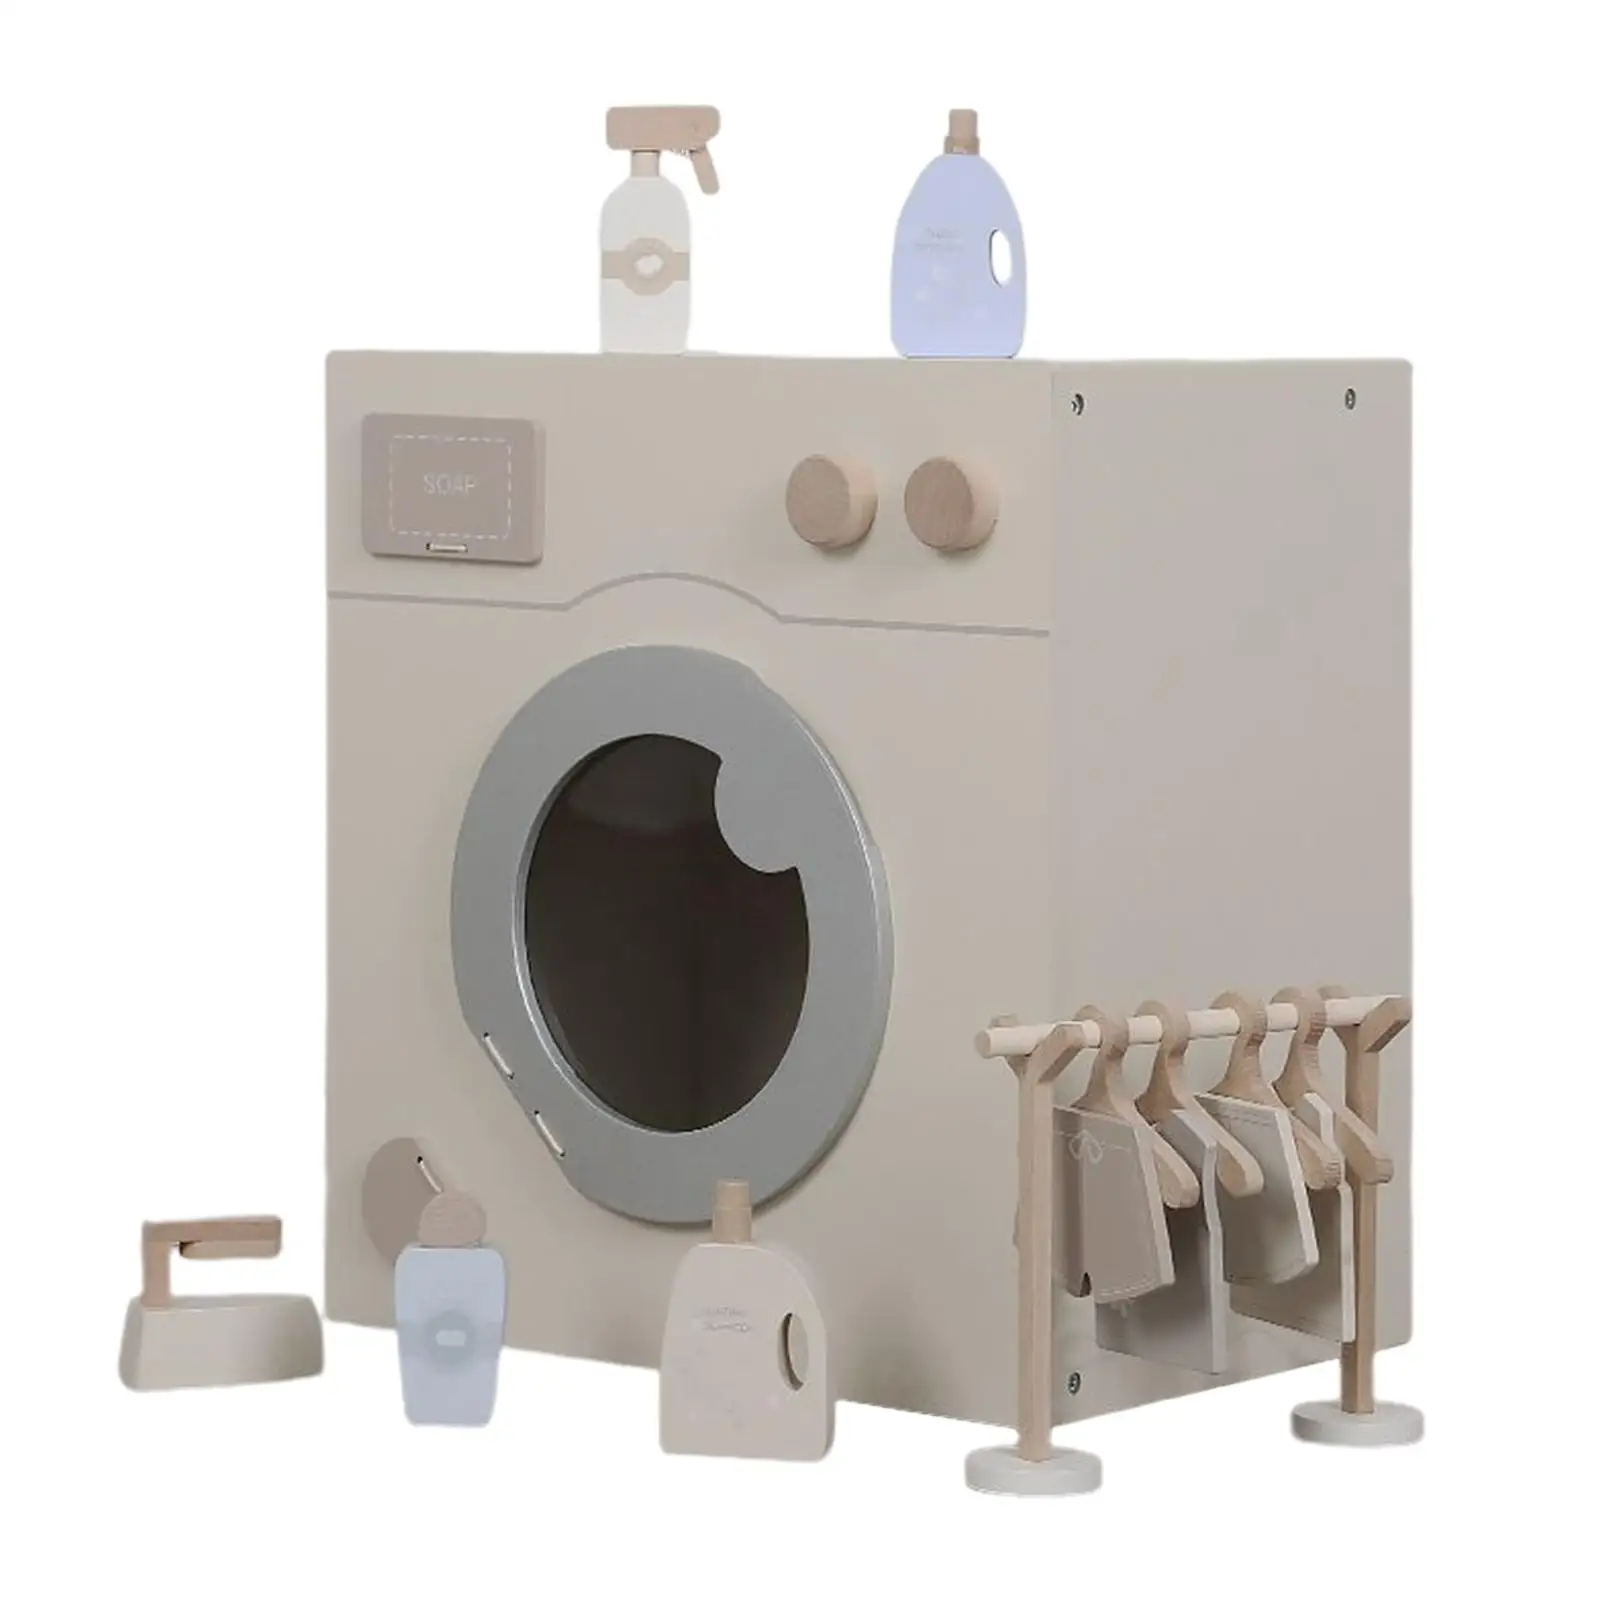 Wooden Washing Machine Set with Accessories Laundry Set Interactive Toy Appliance Realistic Role Play Toy for Toddlers Gift Kids